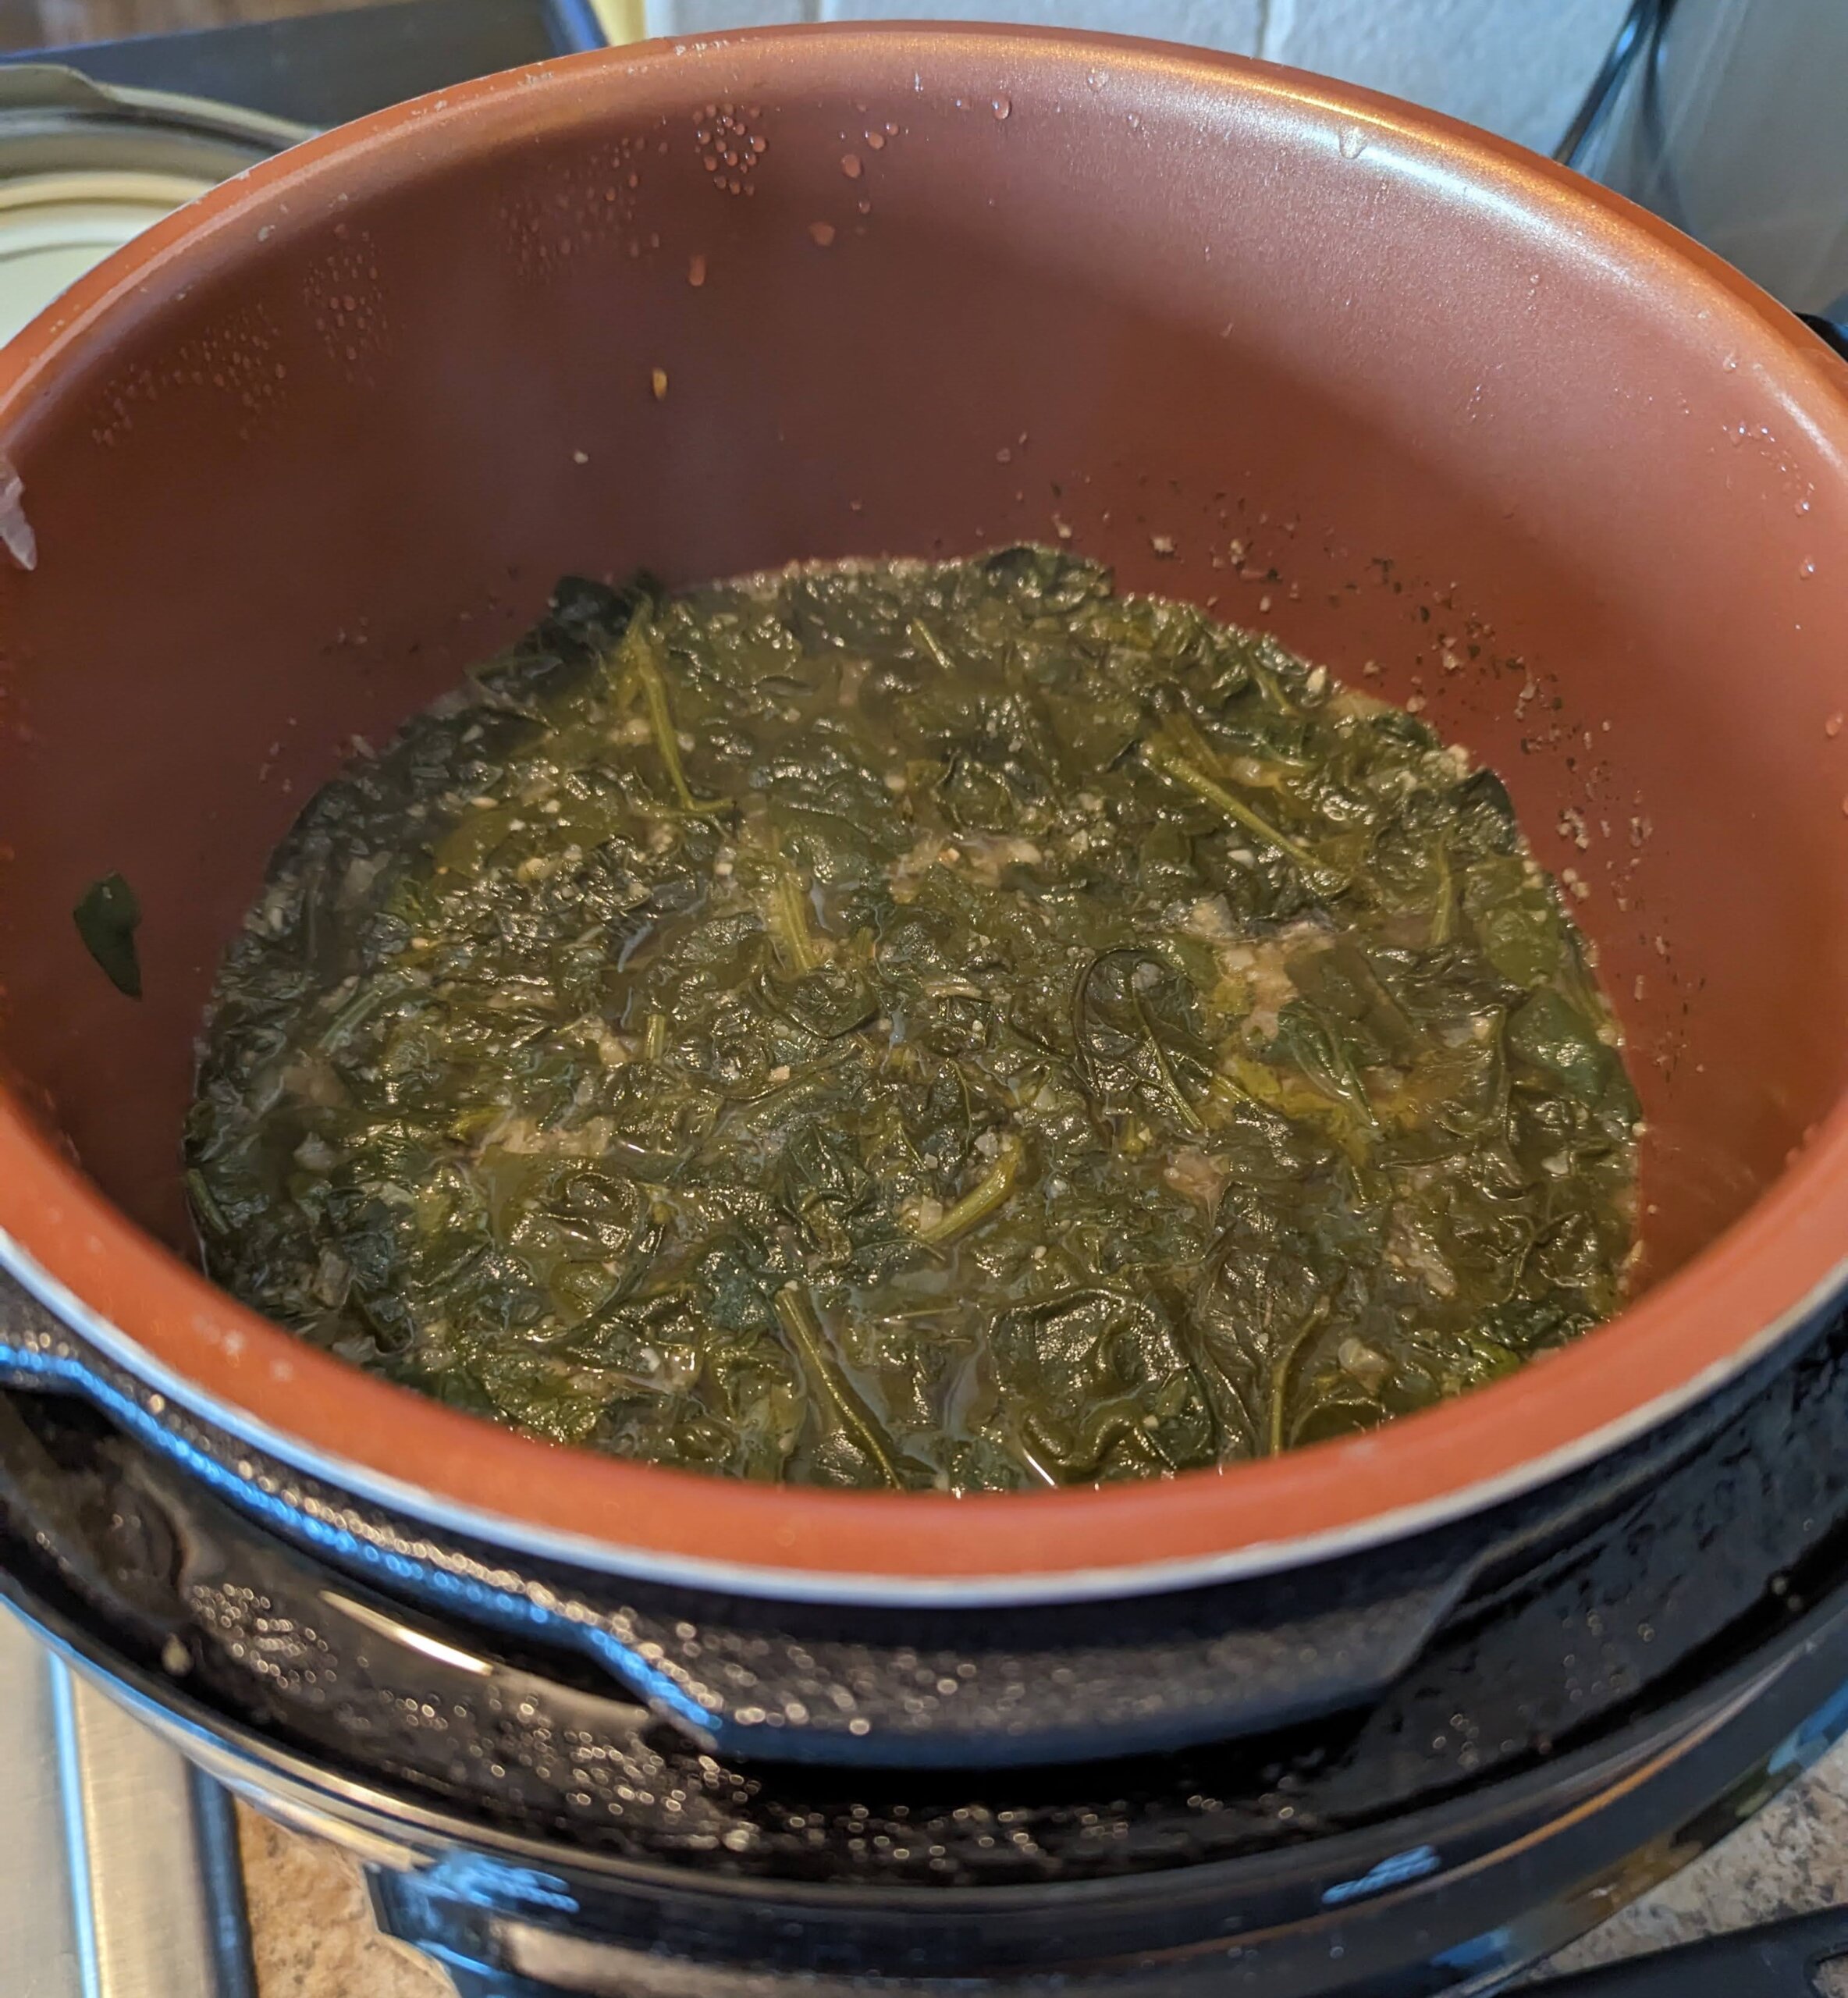 Spinach collects on top until stirred in.